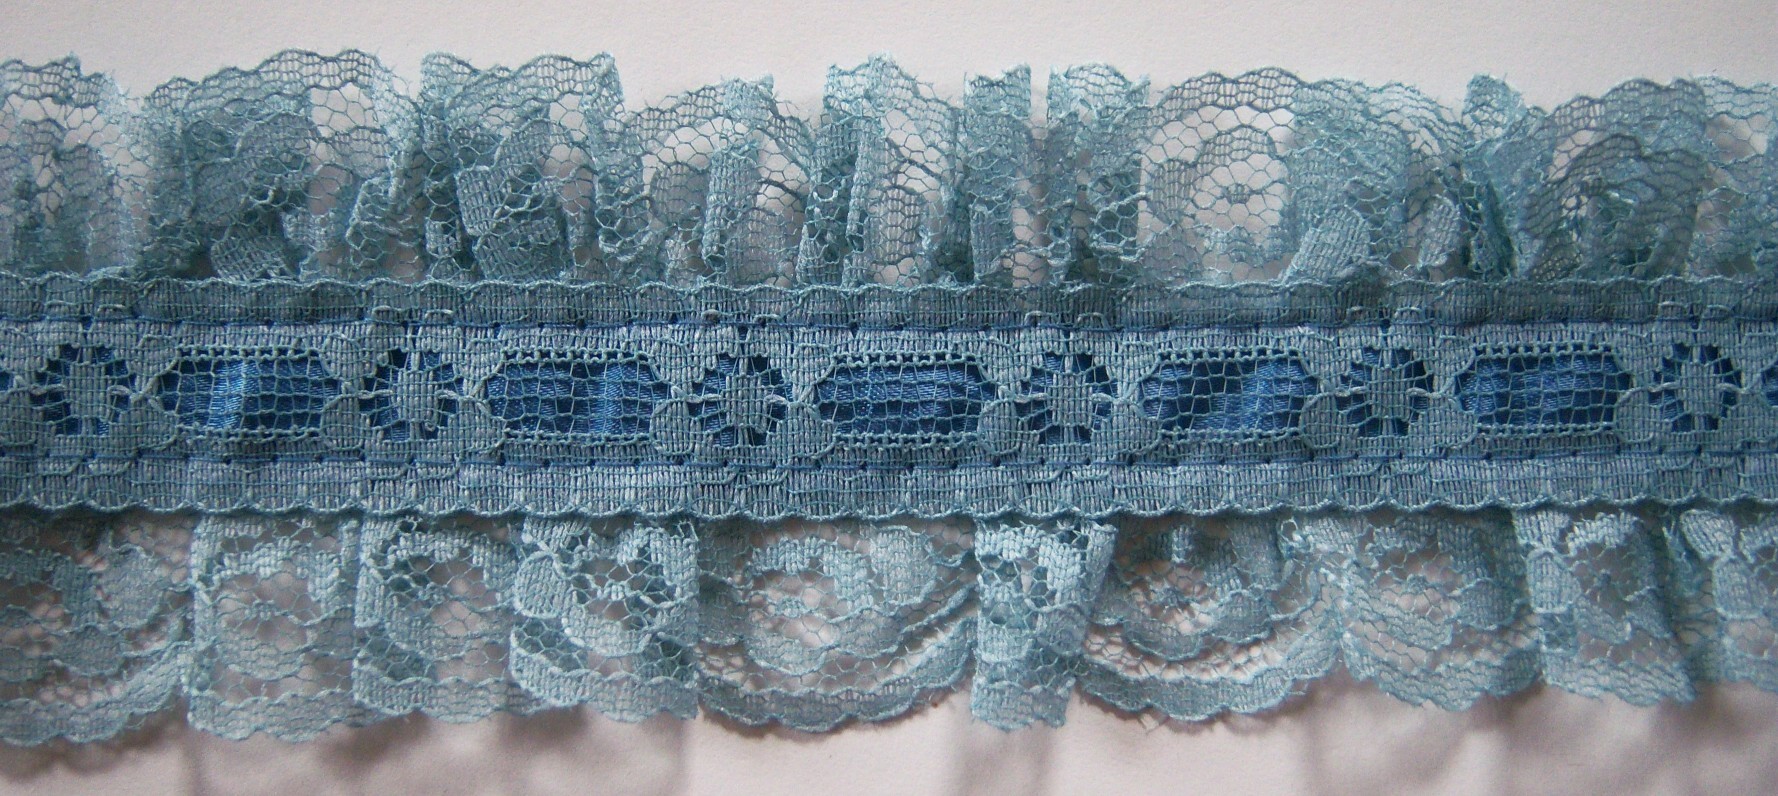 Country Blue Satin Ruffled 2 3/8" Lace